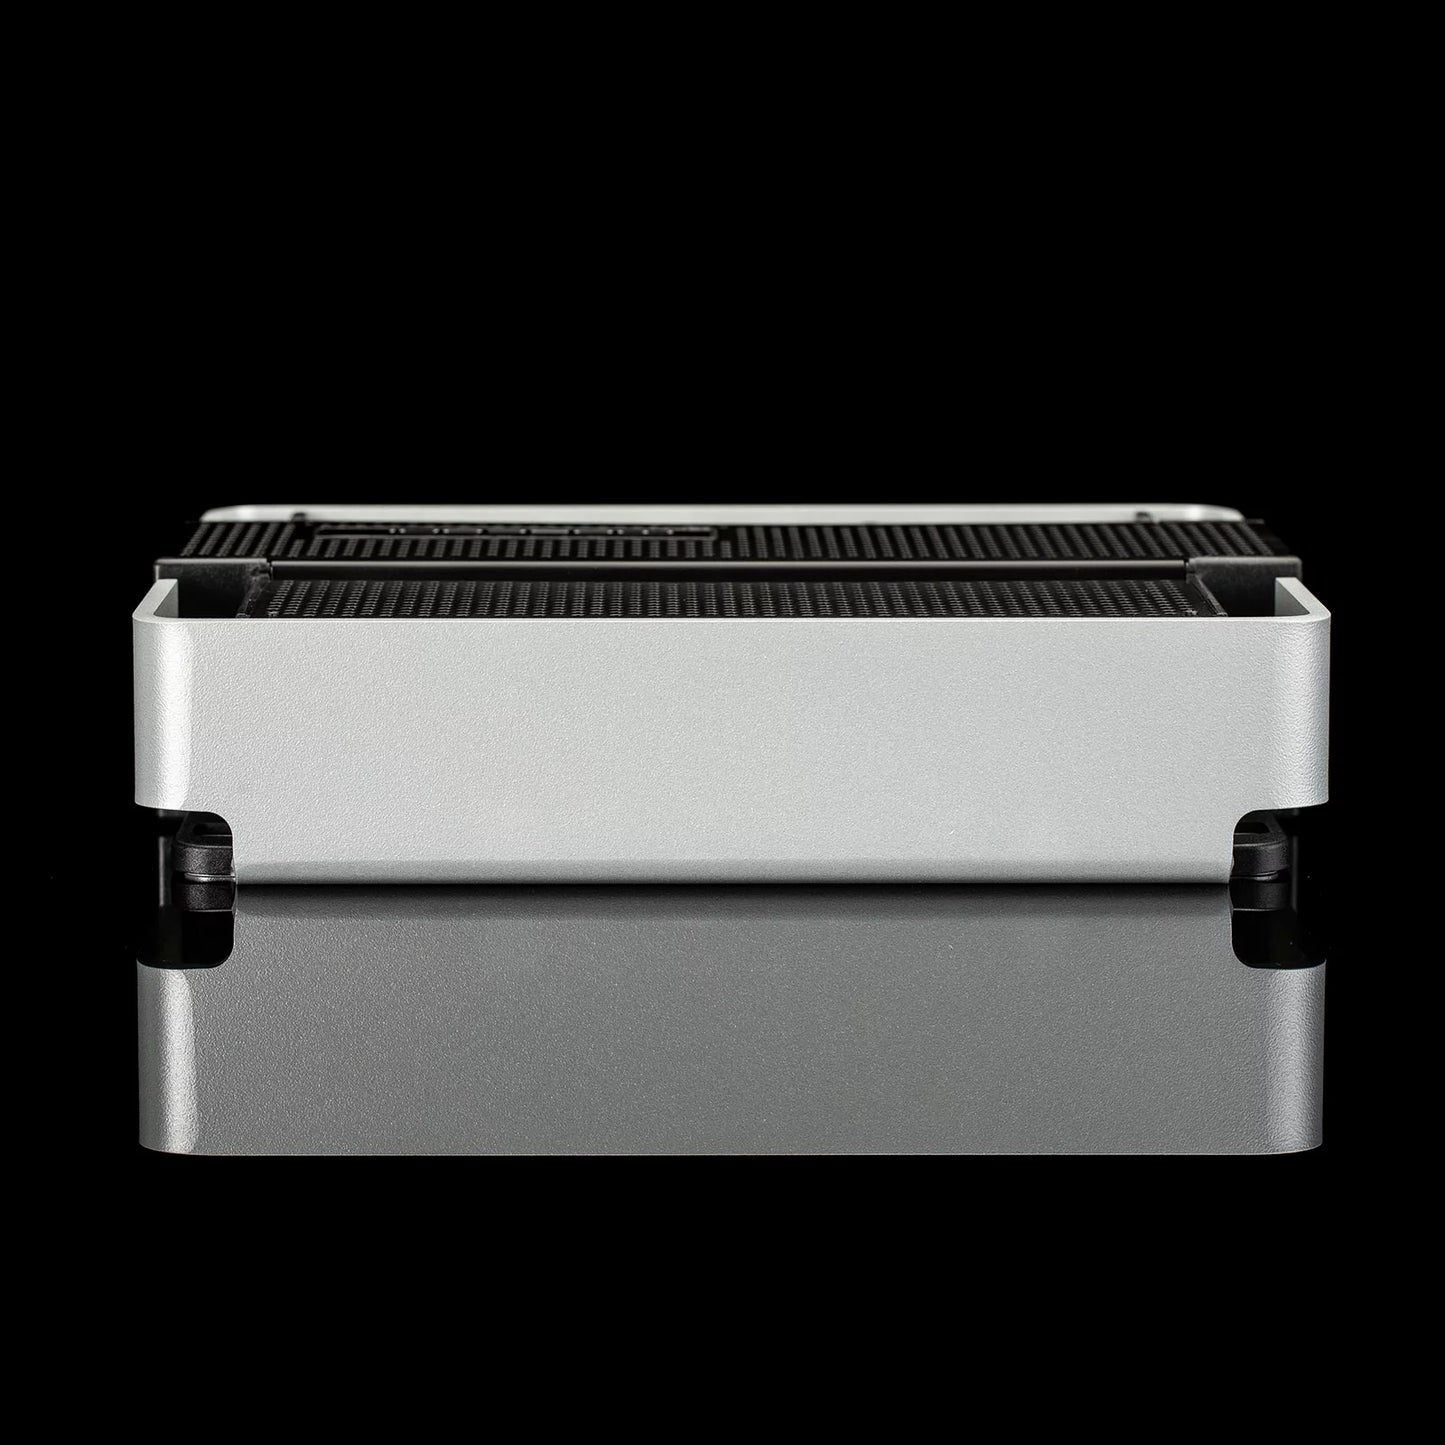 MOSCONI PRO 4|10 CLASS-AB 4-CHANNEL AMPLIFIER